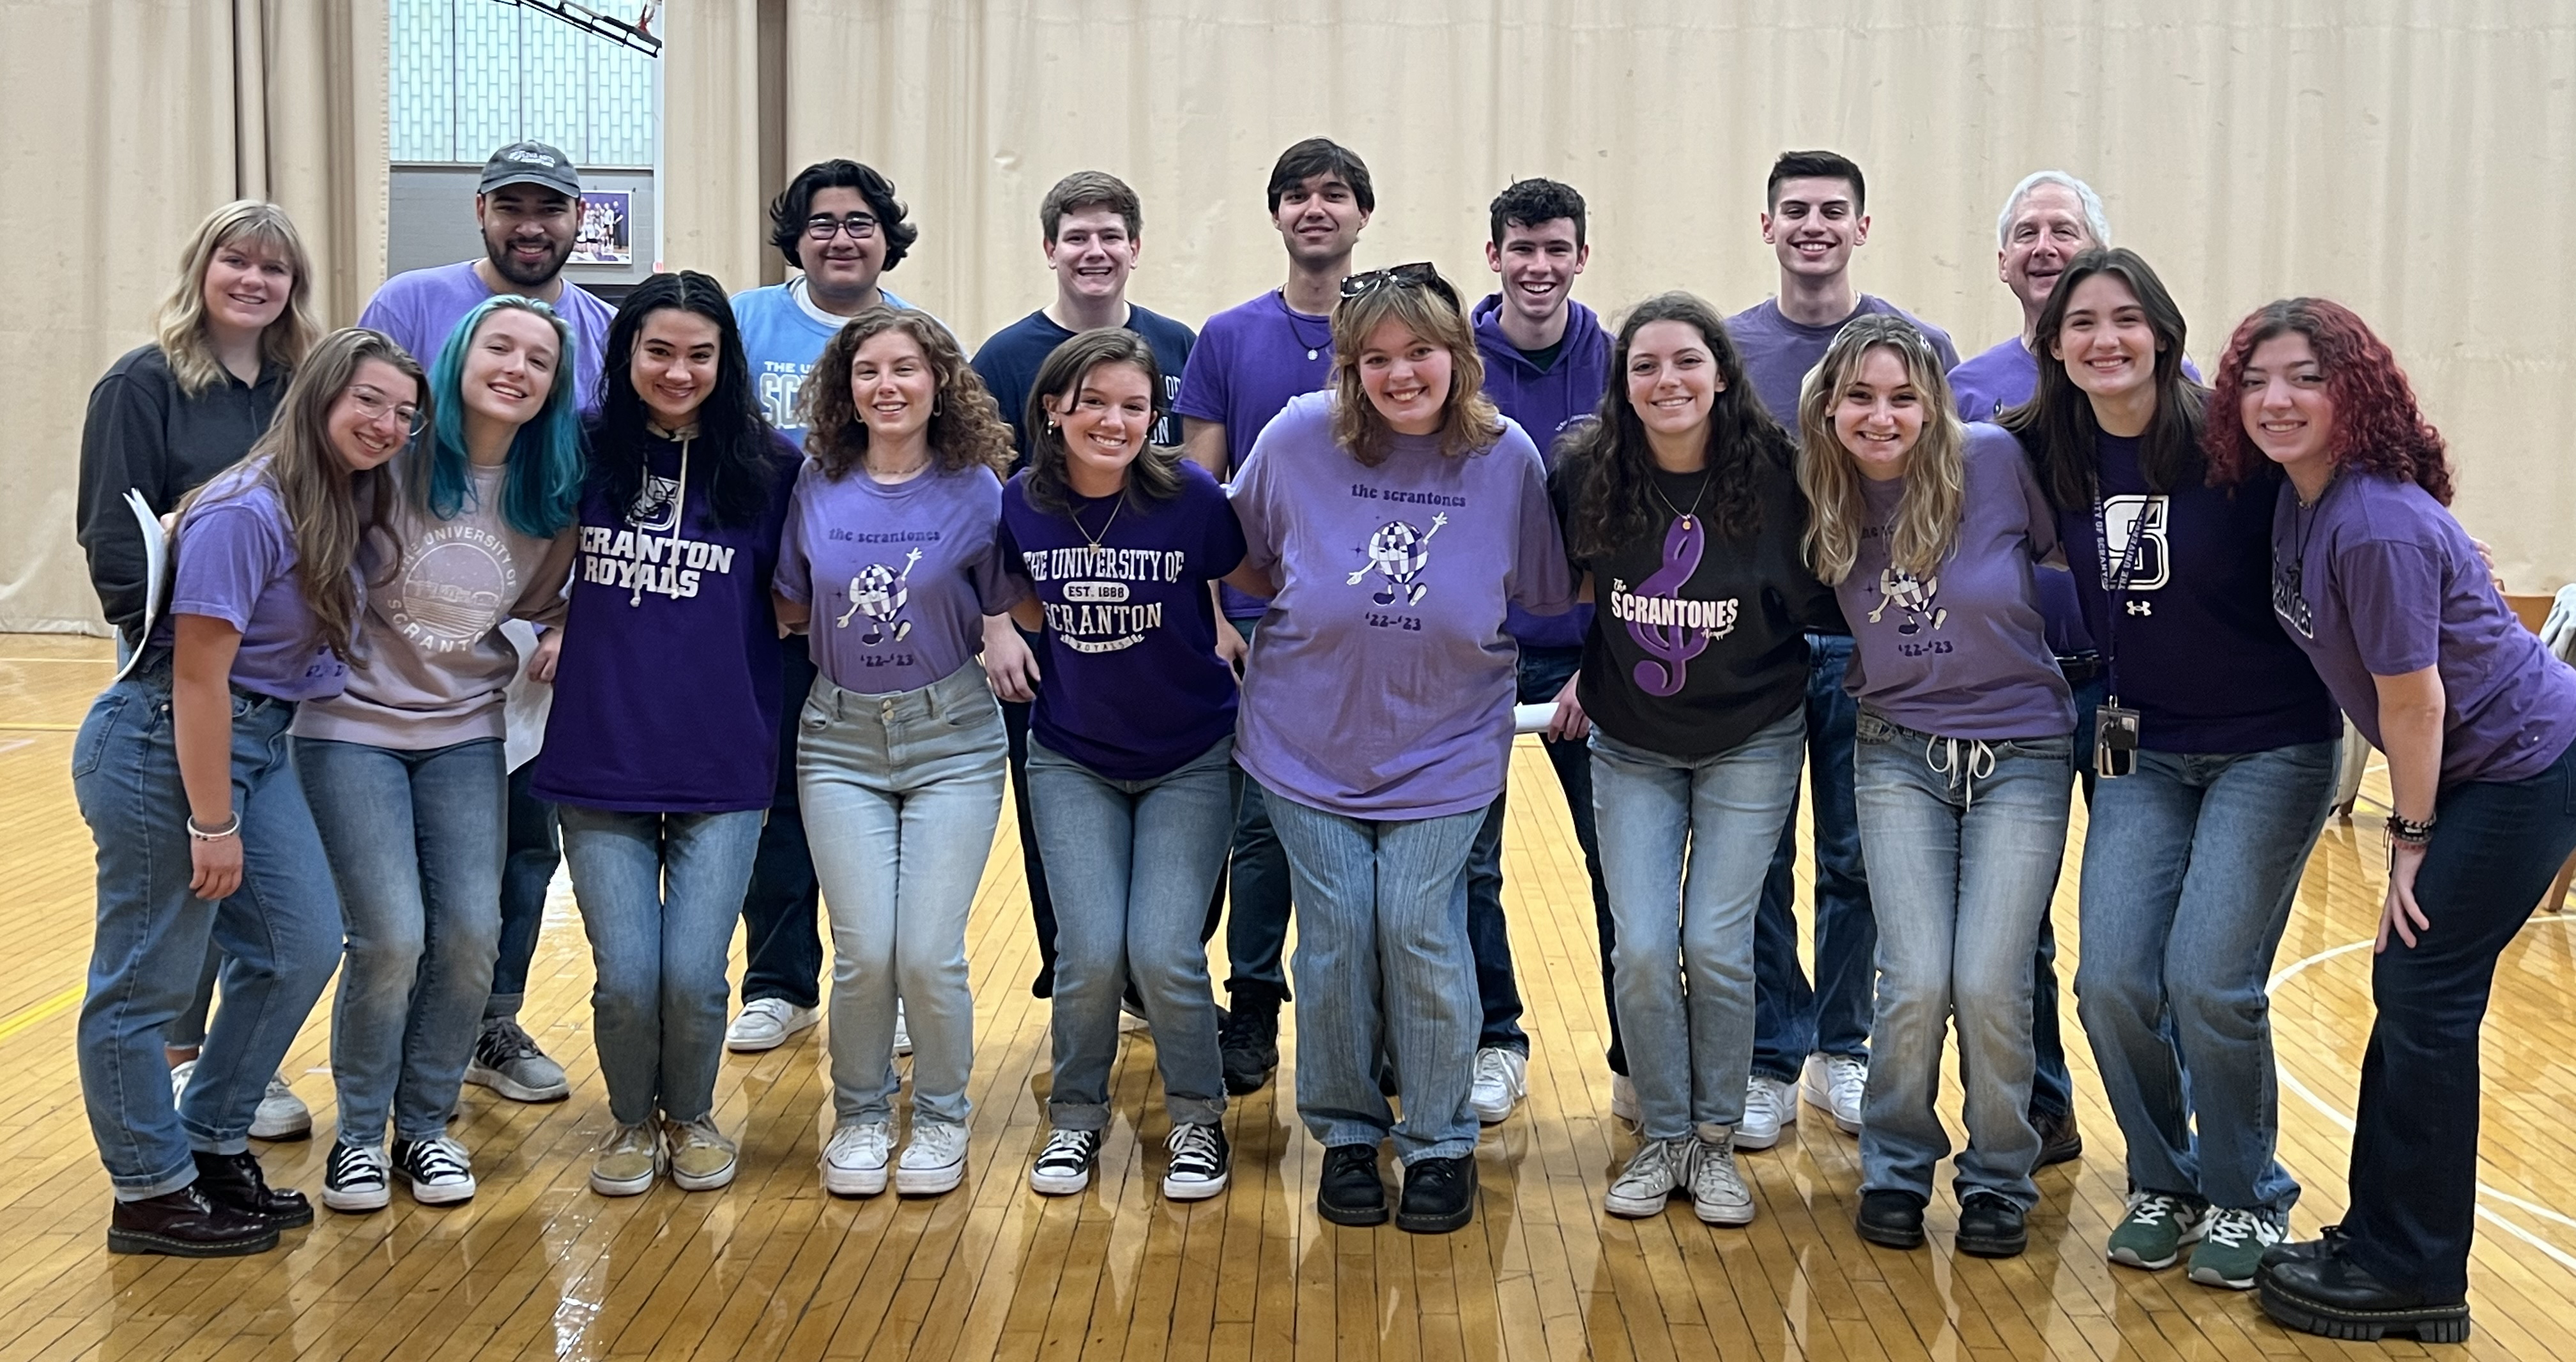 group of students wearing purple shirts pose for a photo